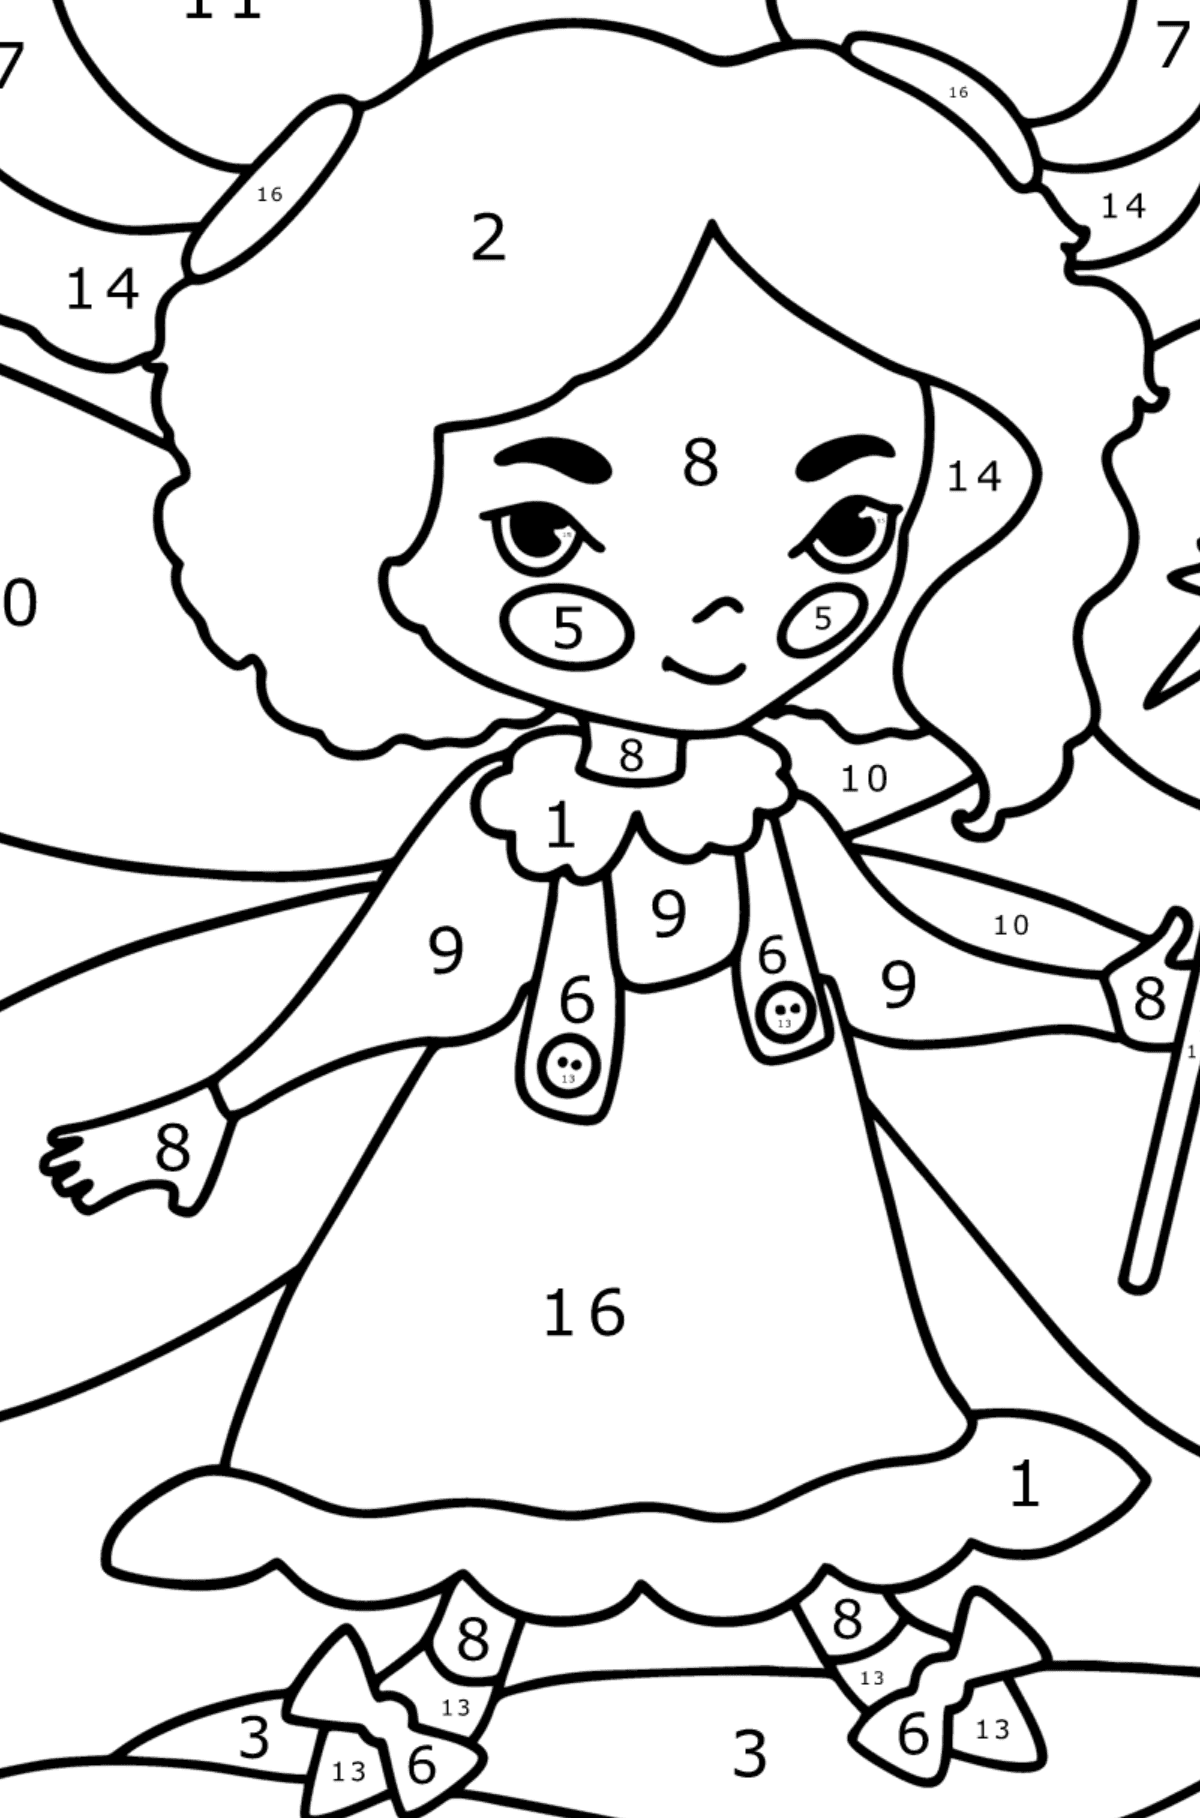 Fairy with a magic wand coloring page - Coloring by Numbers for Kids